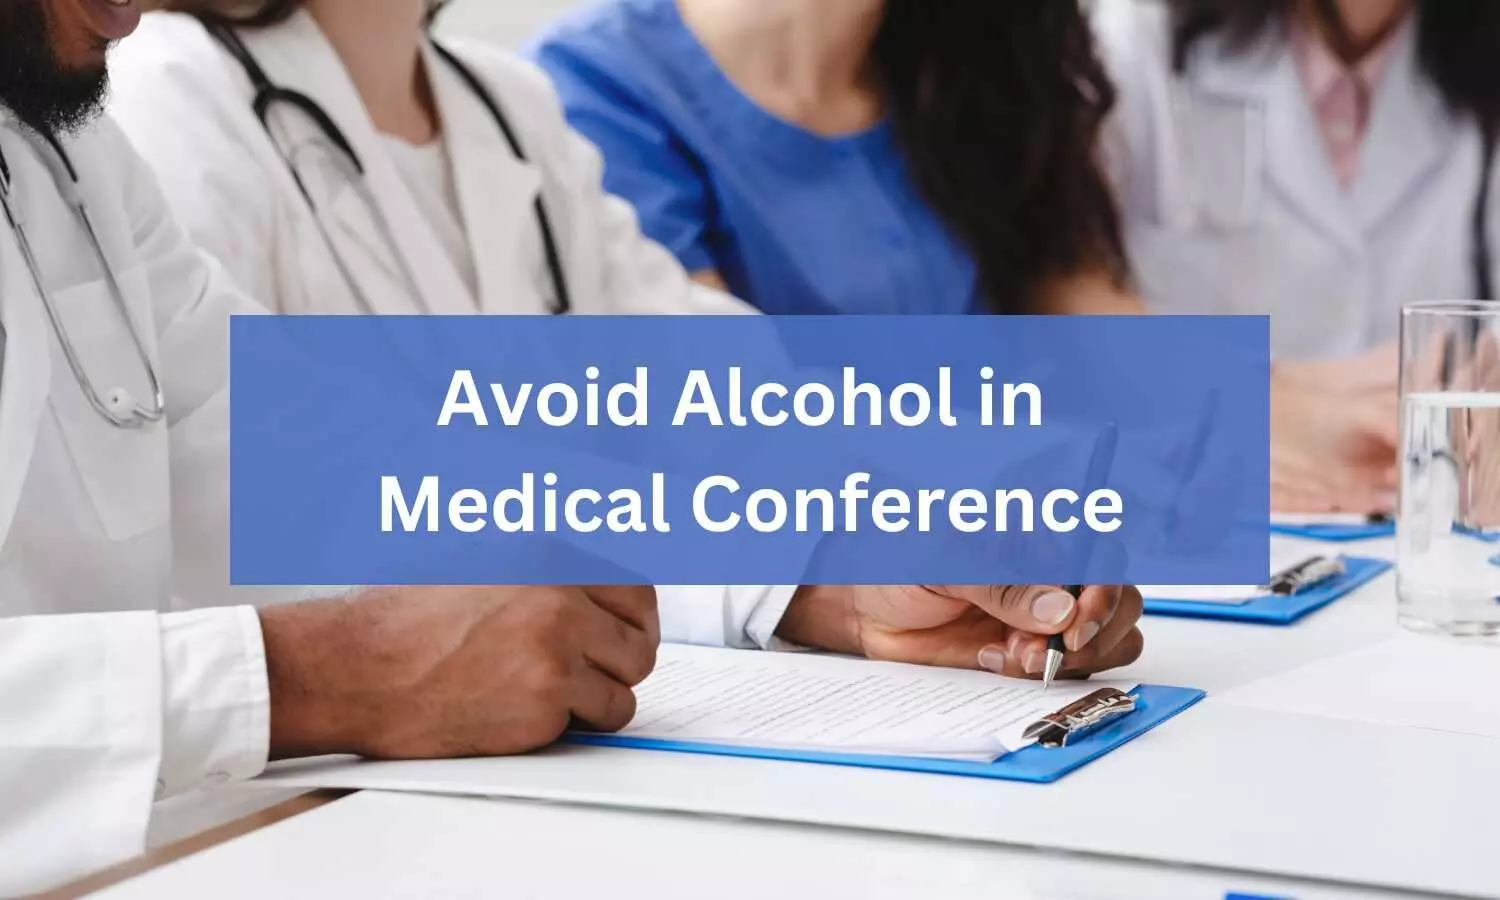 Set Example, Say NO to Alcohol in Medical Conferences, Workshops, Seminars, CME: DGHS tells Doctors